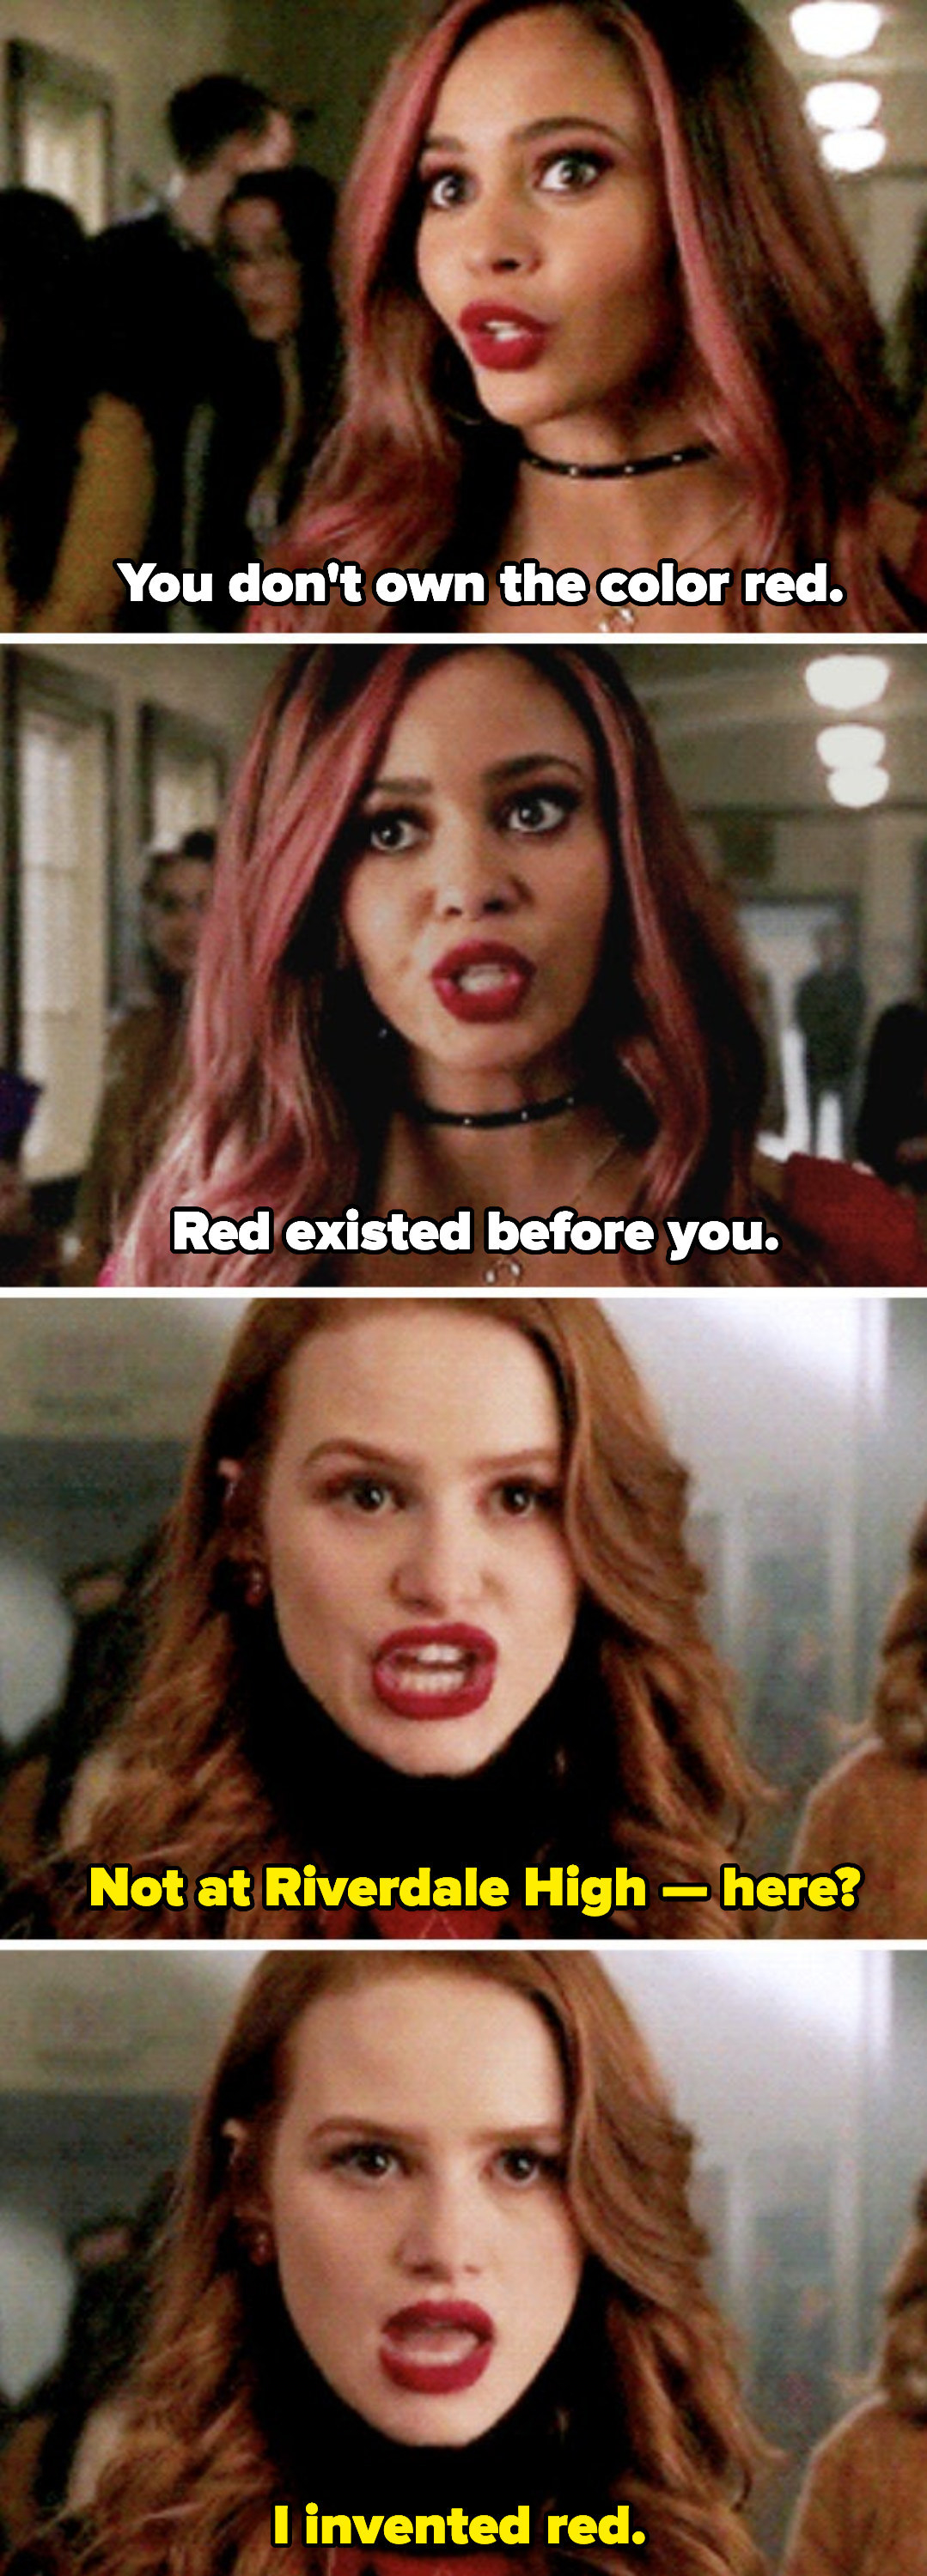 Cheryl and Toni arguing over who &quot;owns&quot; the color red